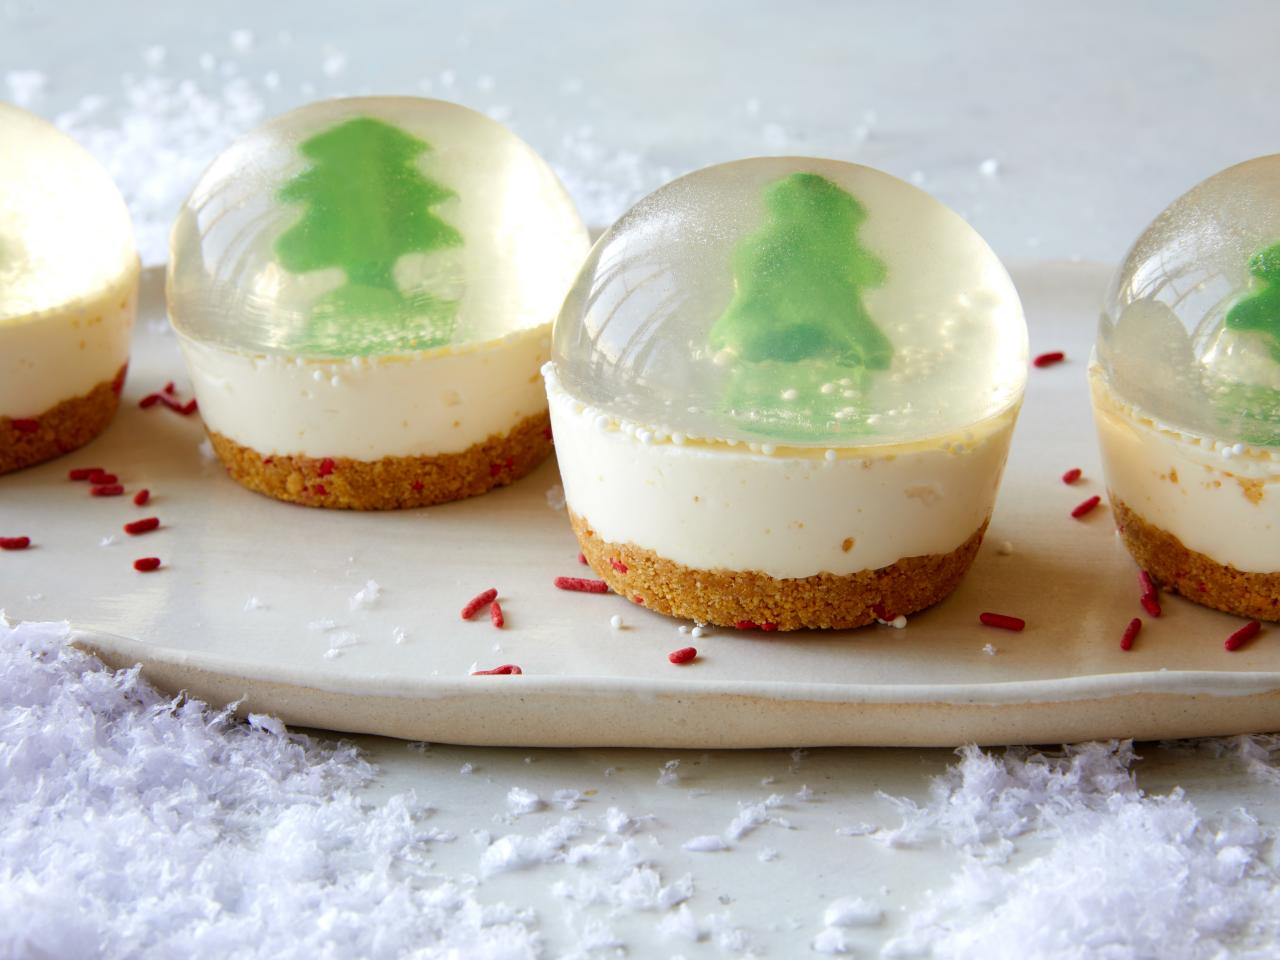 Holiday Recipes: Menus, Desserts, Party Ideas from Food Network